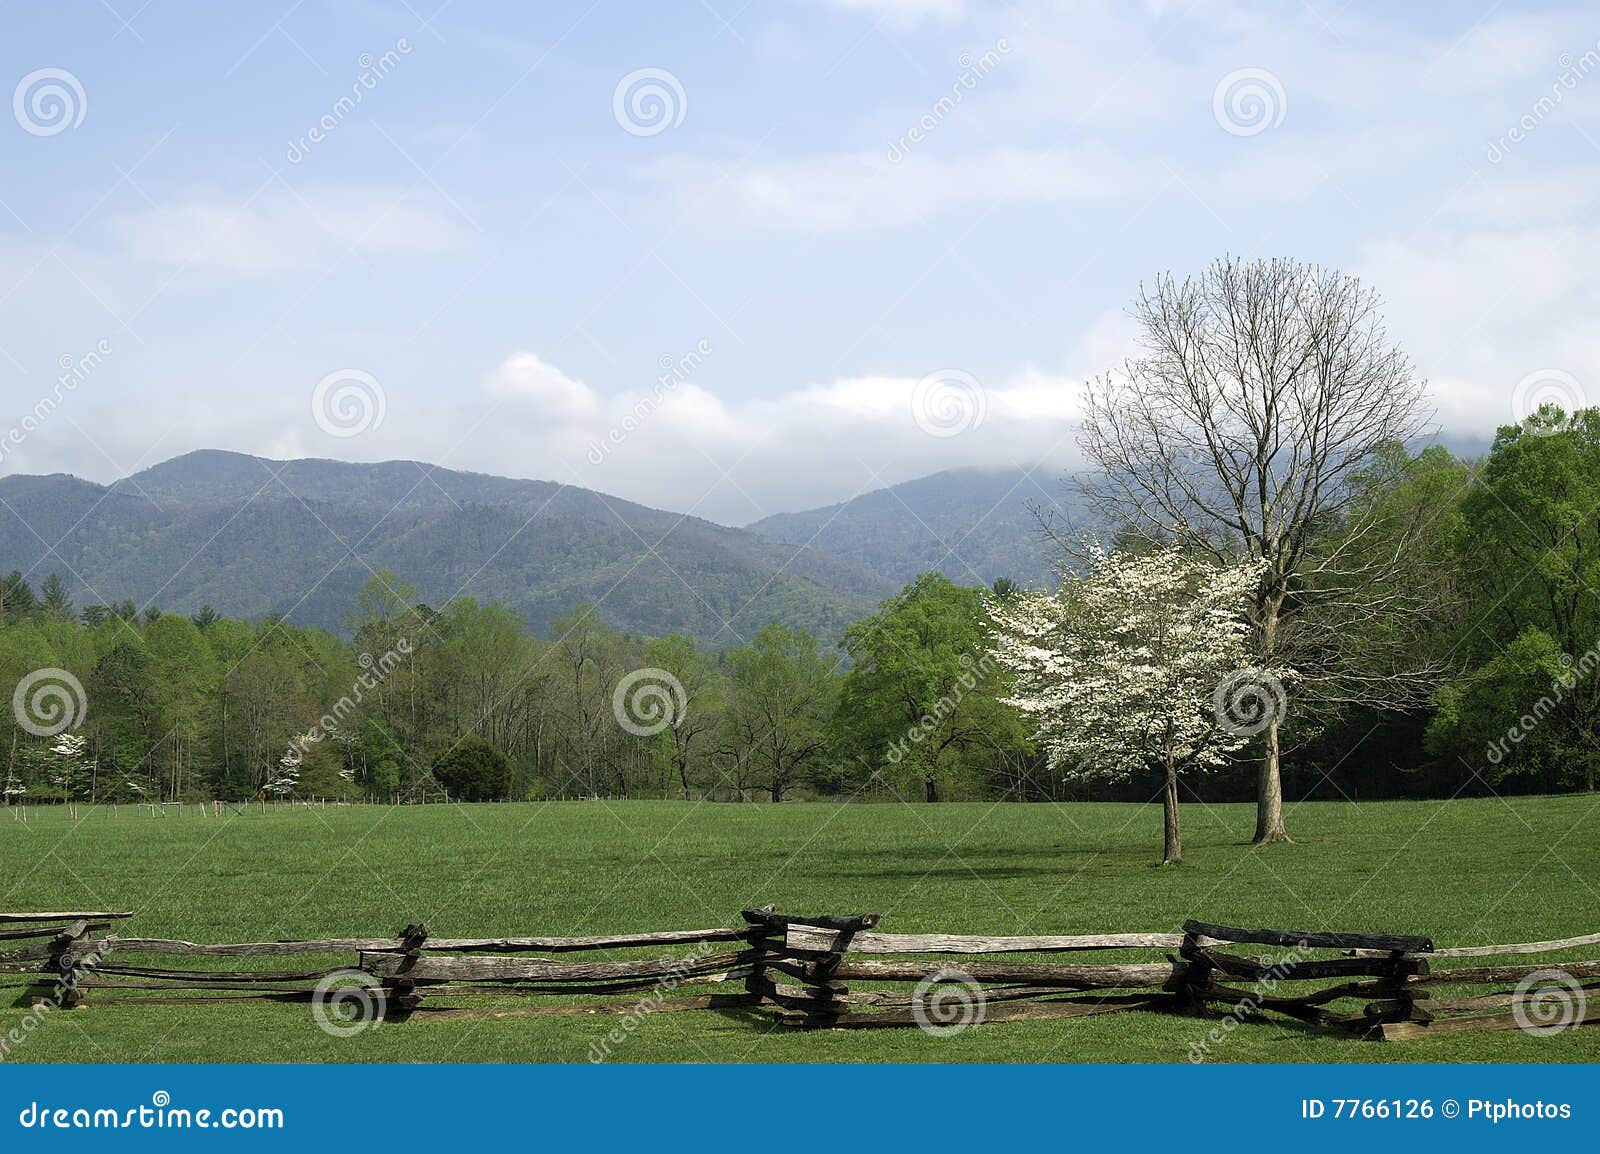 great smoky mountains in spring